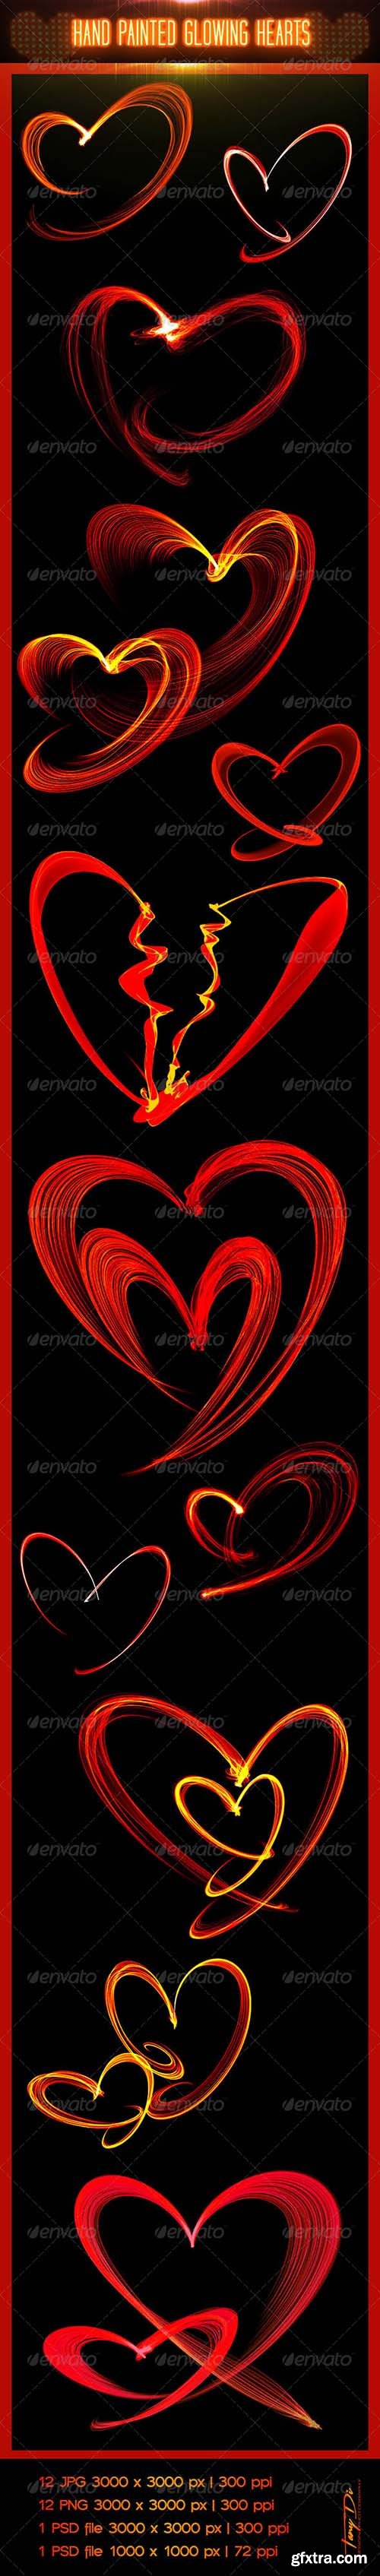 Graphicriver Hand Painted Glowing Hearts 6610541